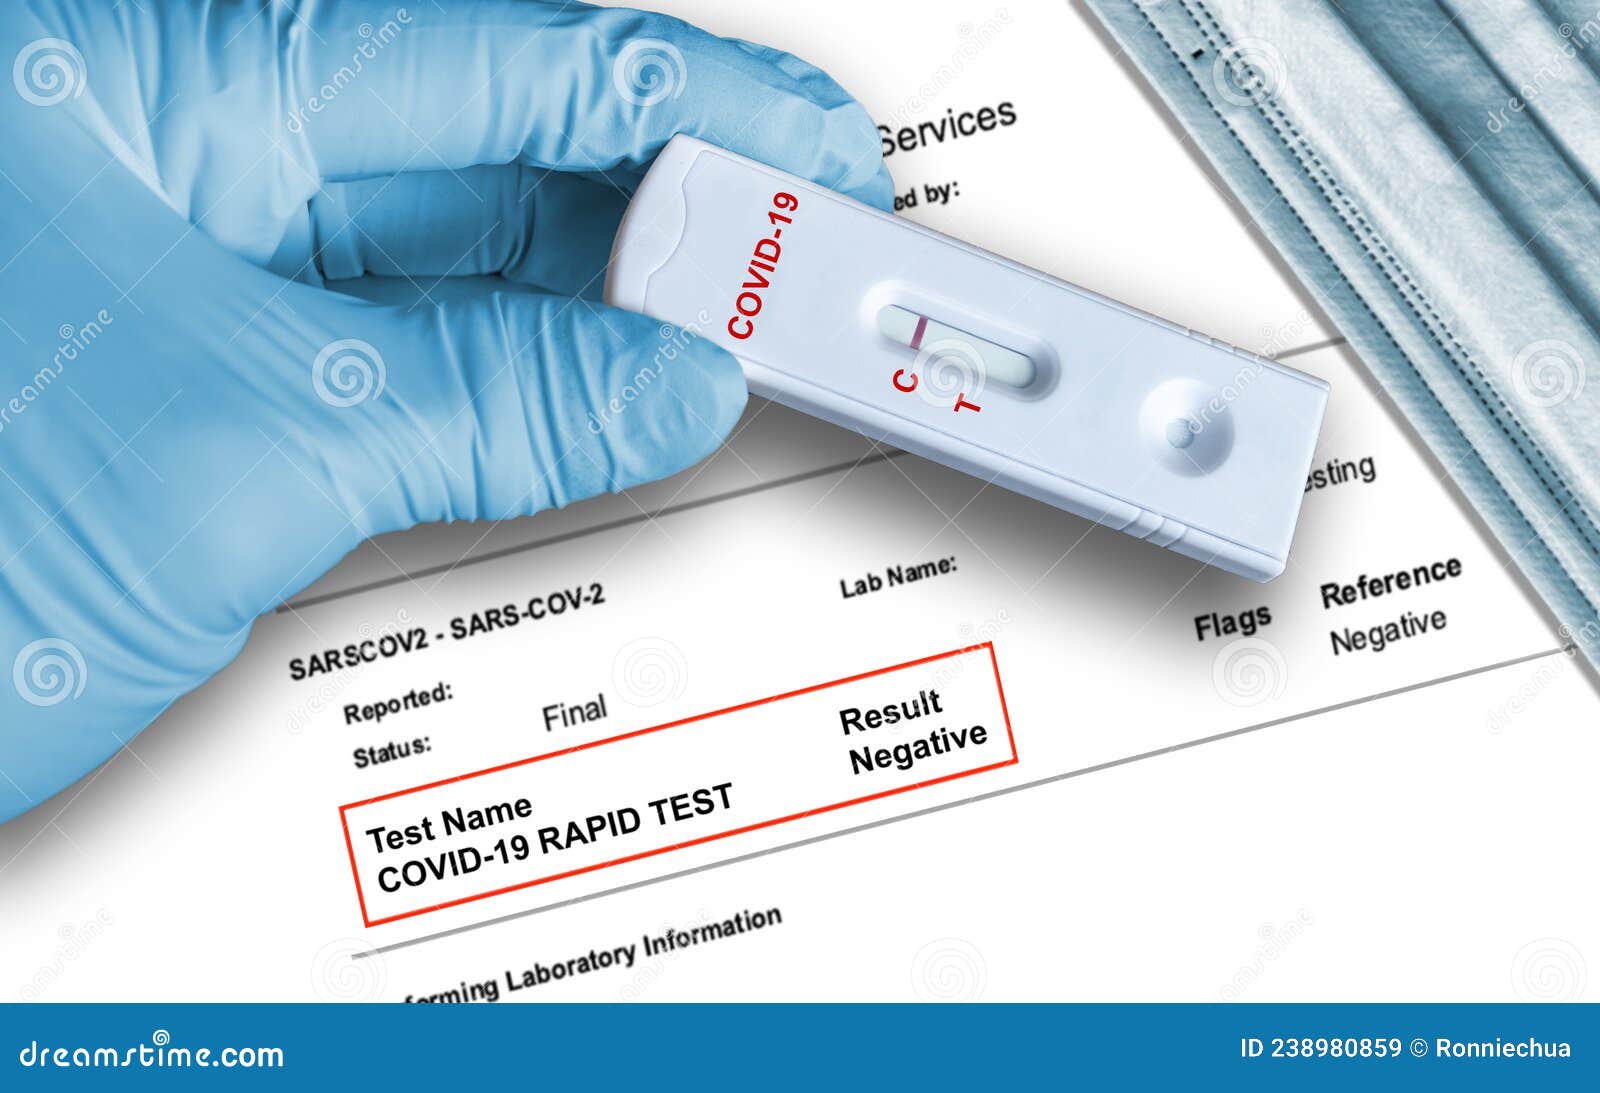 negative antigen test result by using rapid self testing device for covid-19